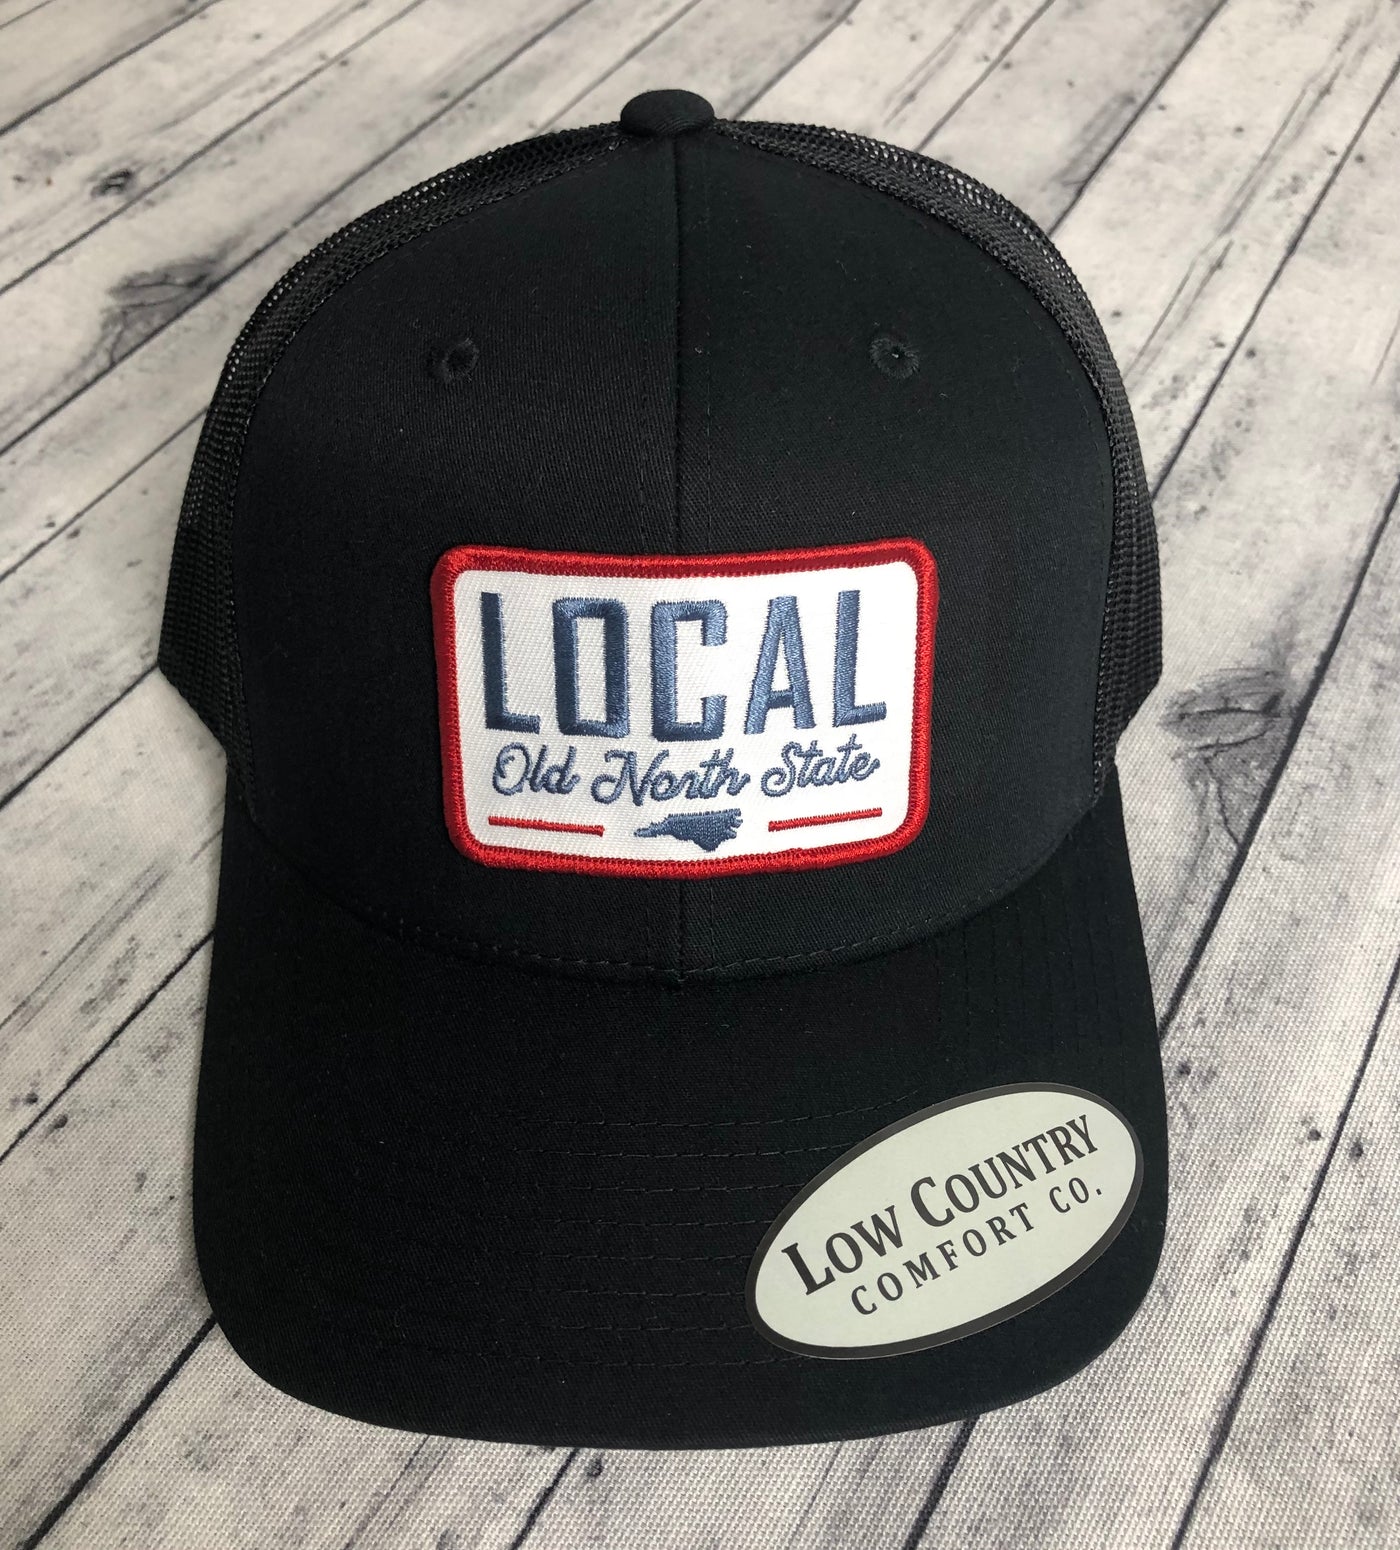 Low Country Comfort Co. NC Local Woven Patch Black Hat